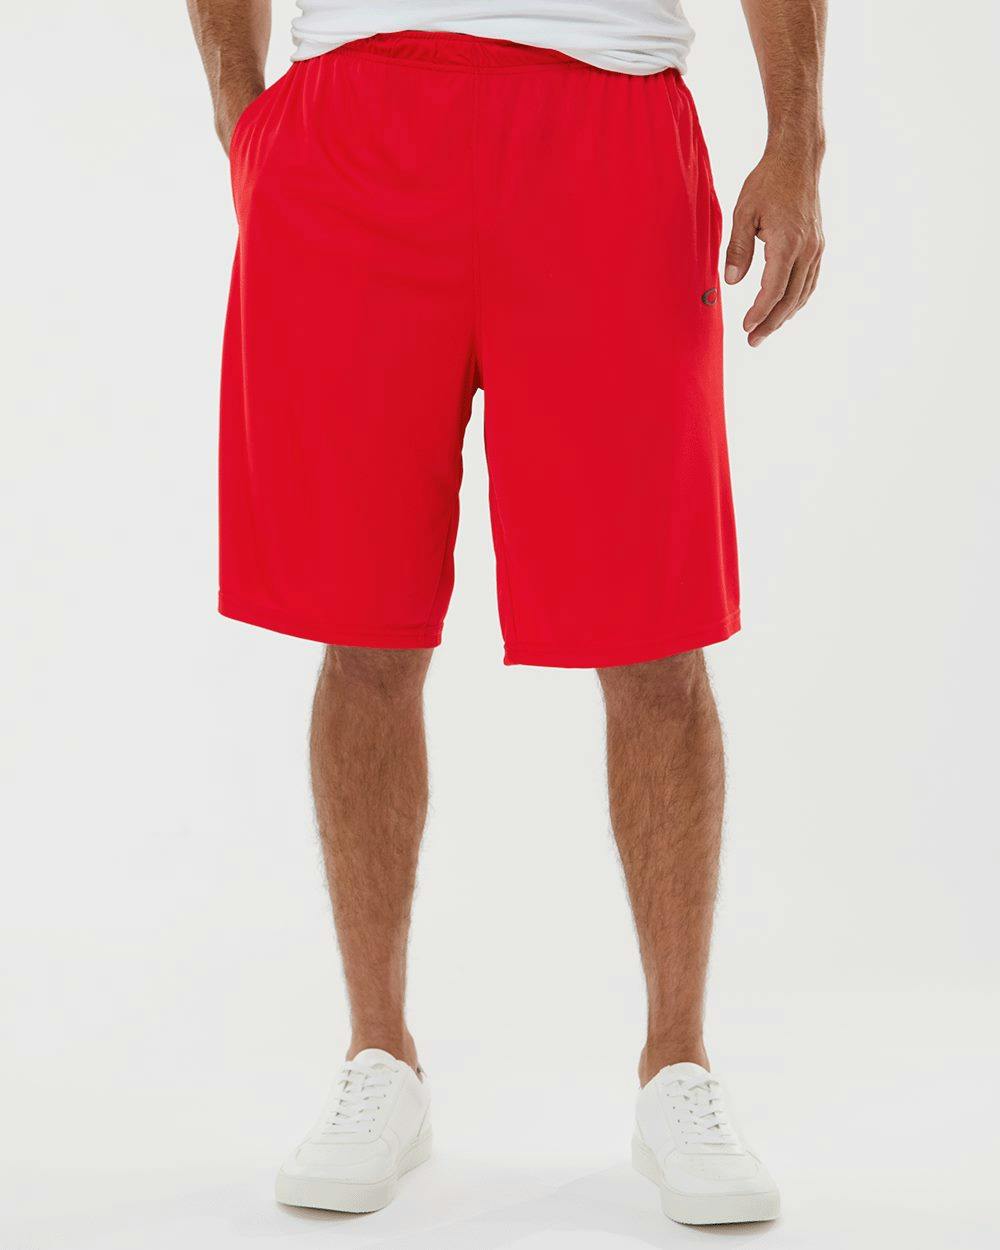 Image for Team Issue Hydrolix Shorts - FOA402995